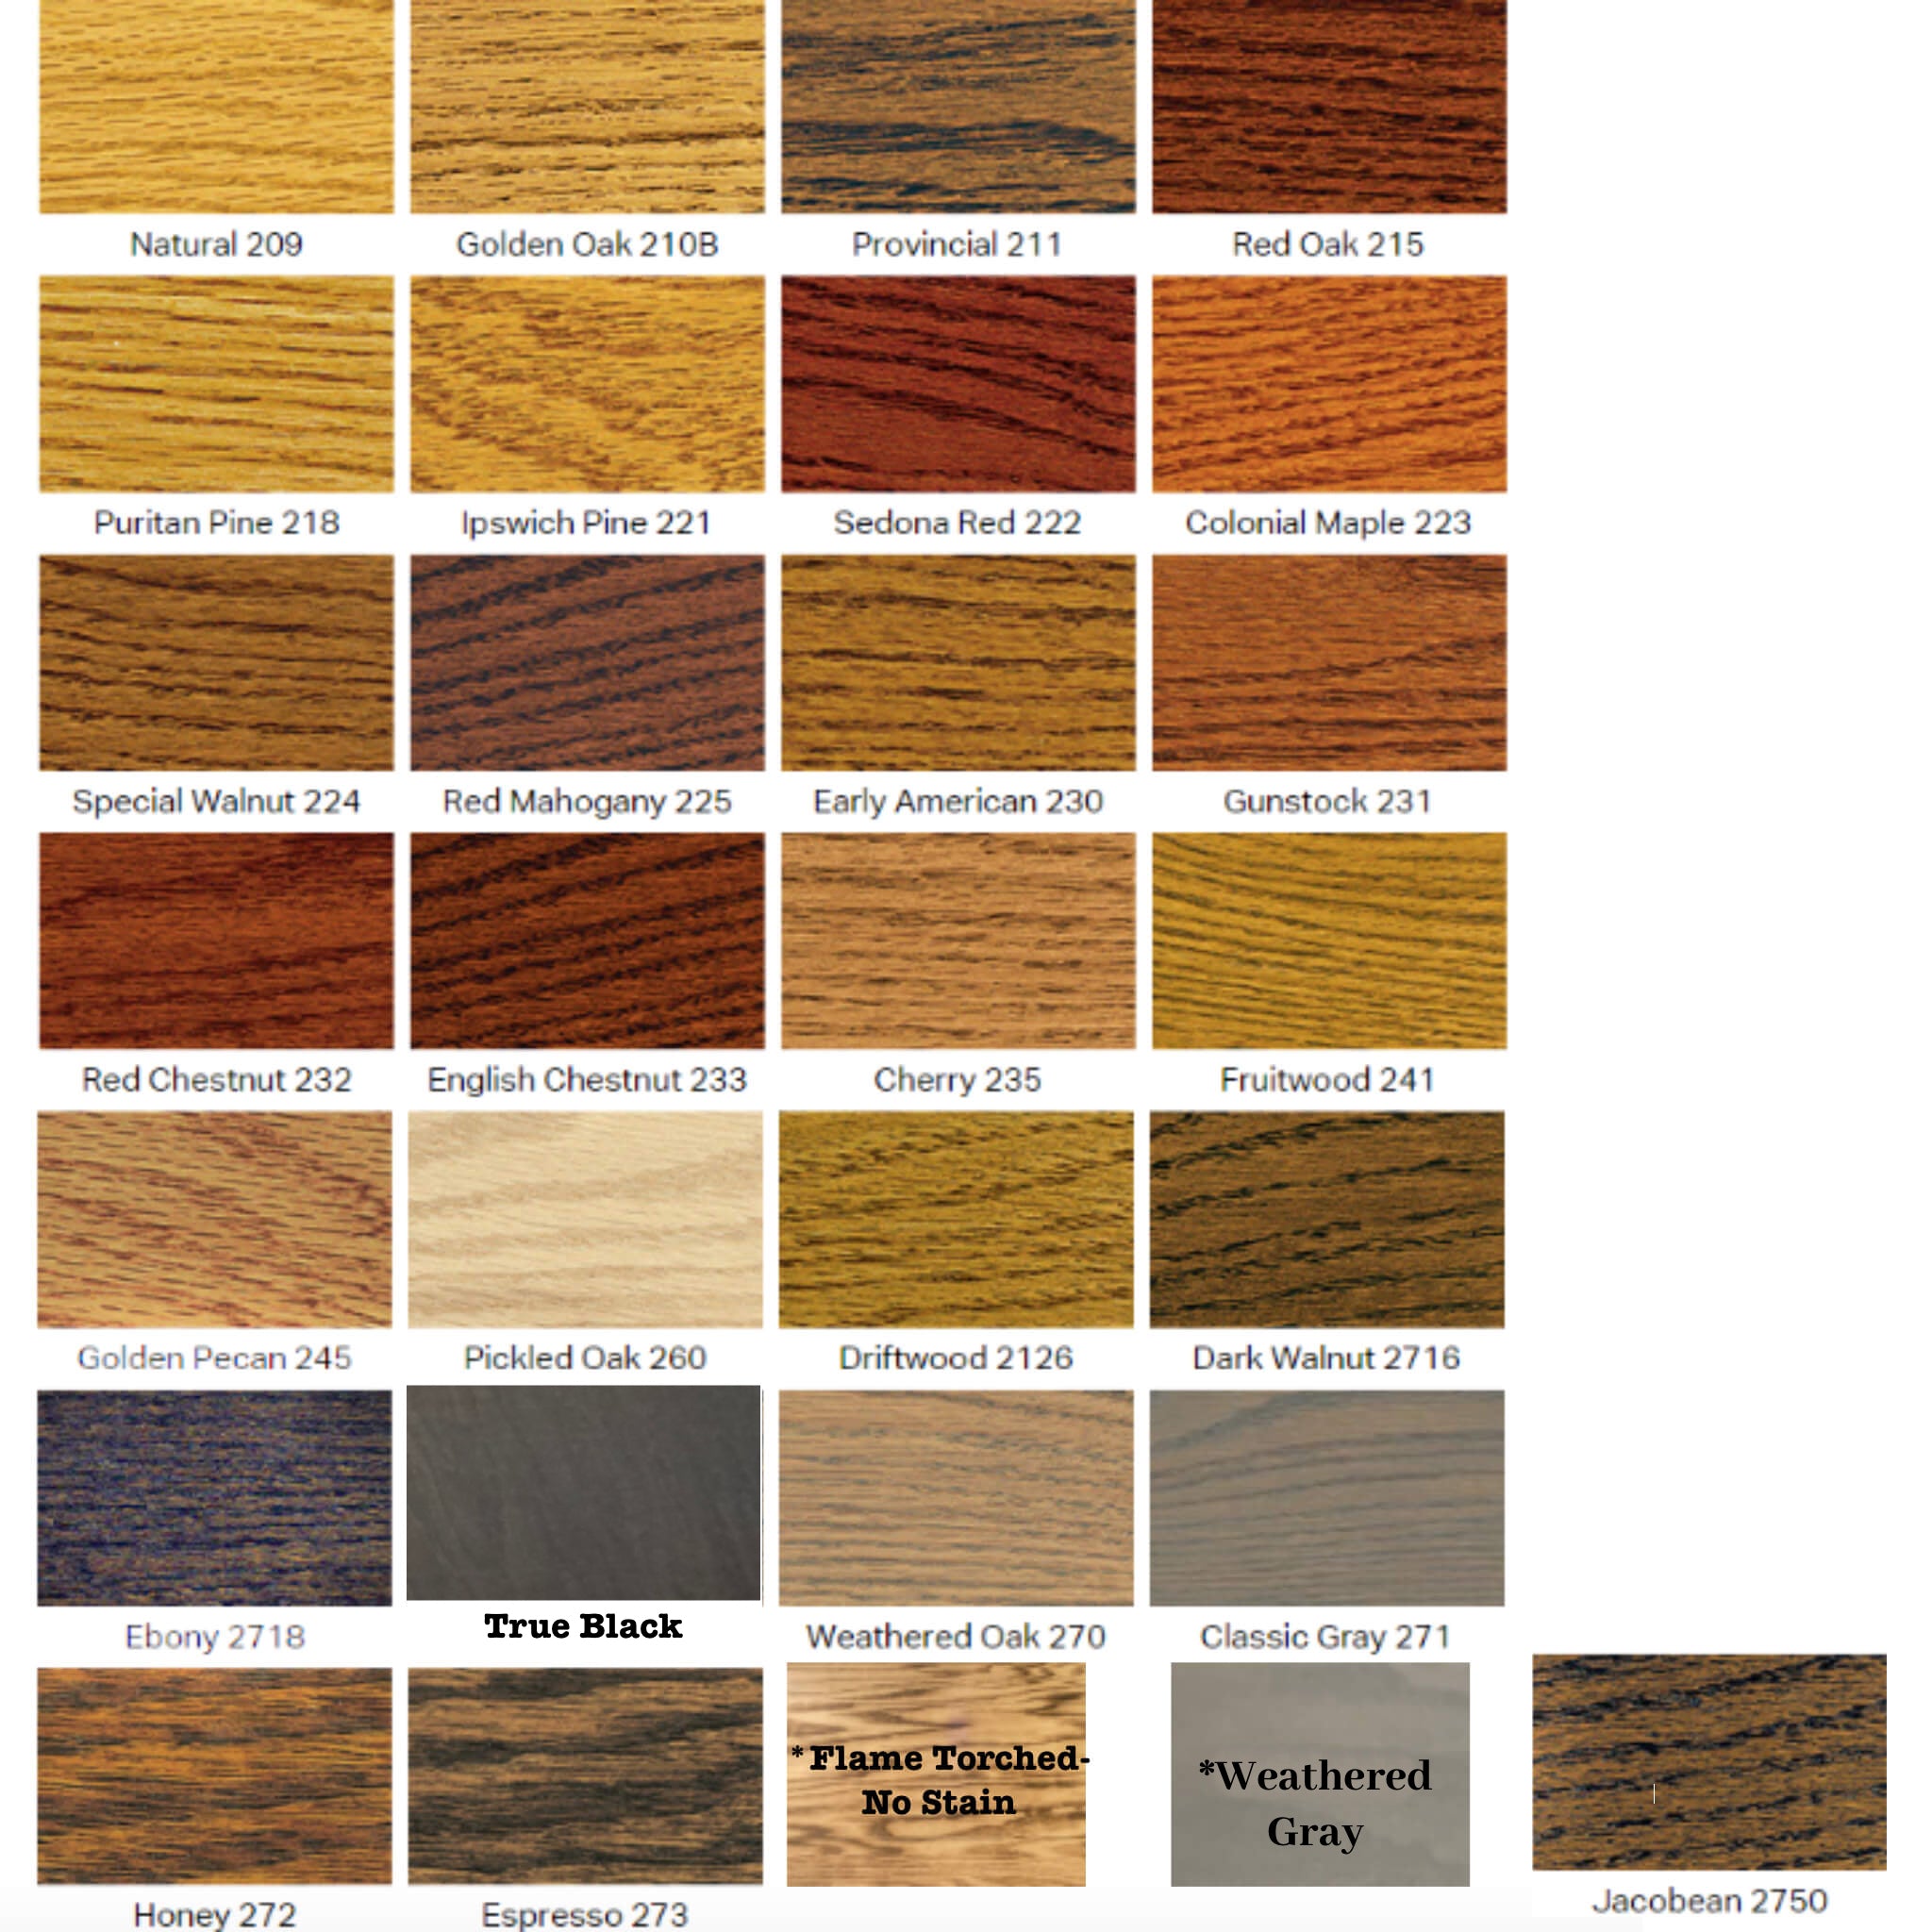 THIS IS A PICTURE SHOWING ALL THE AVAILABLE STAIN OPTIONS IN WHICH THE BOARD CAN BE STAINED IN. FIND OUT MORE AT WWW.SAWYERCUSTOMCRAFTS.COM 